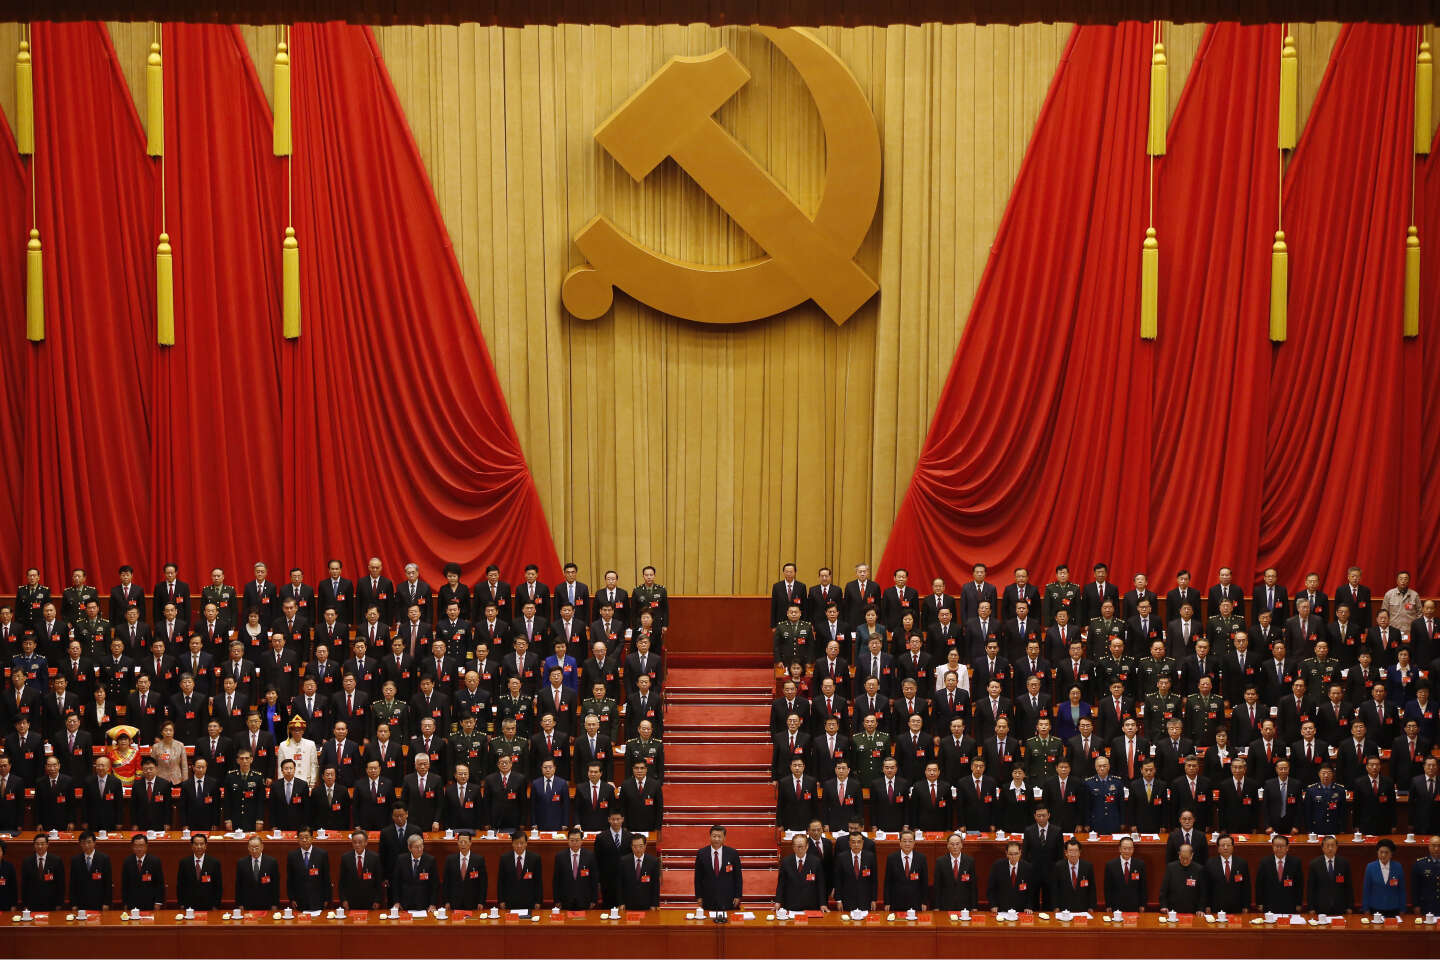 China's Xi Jinping is preparing for a third term